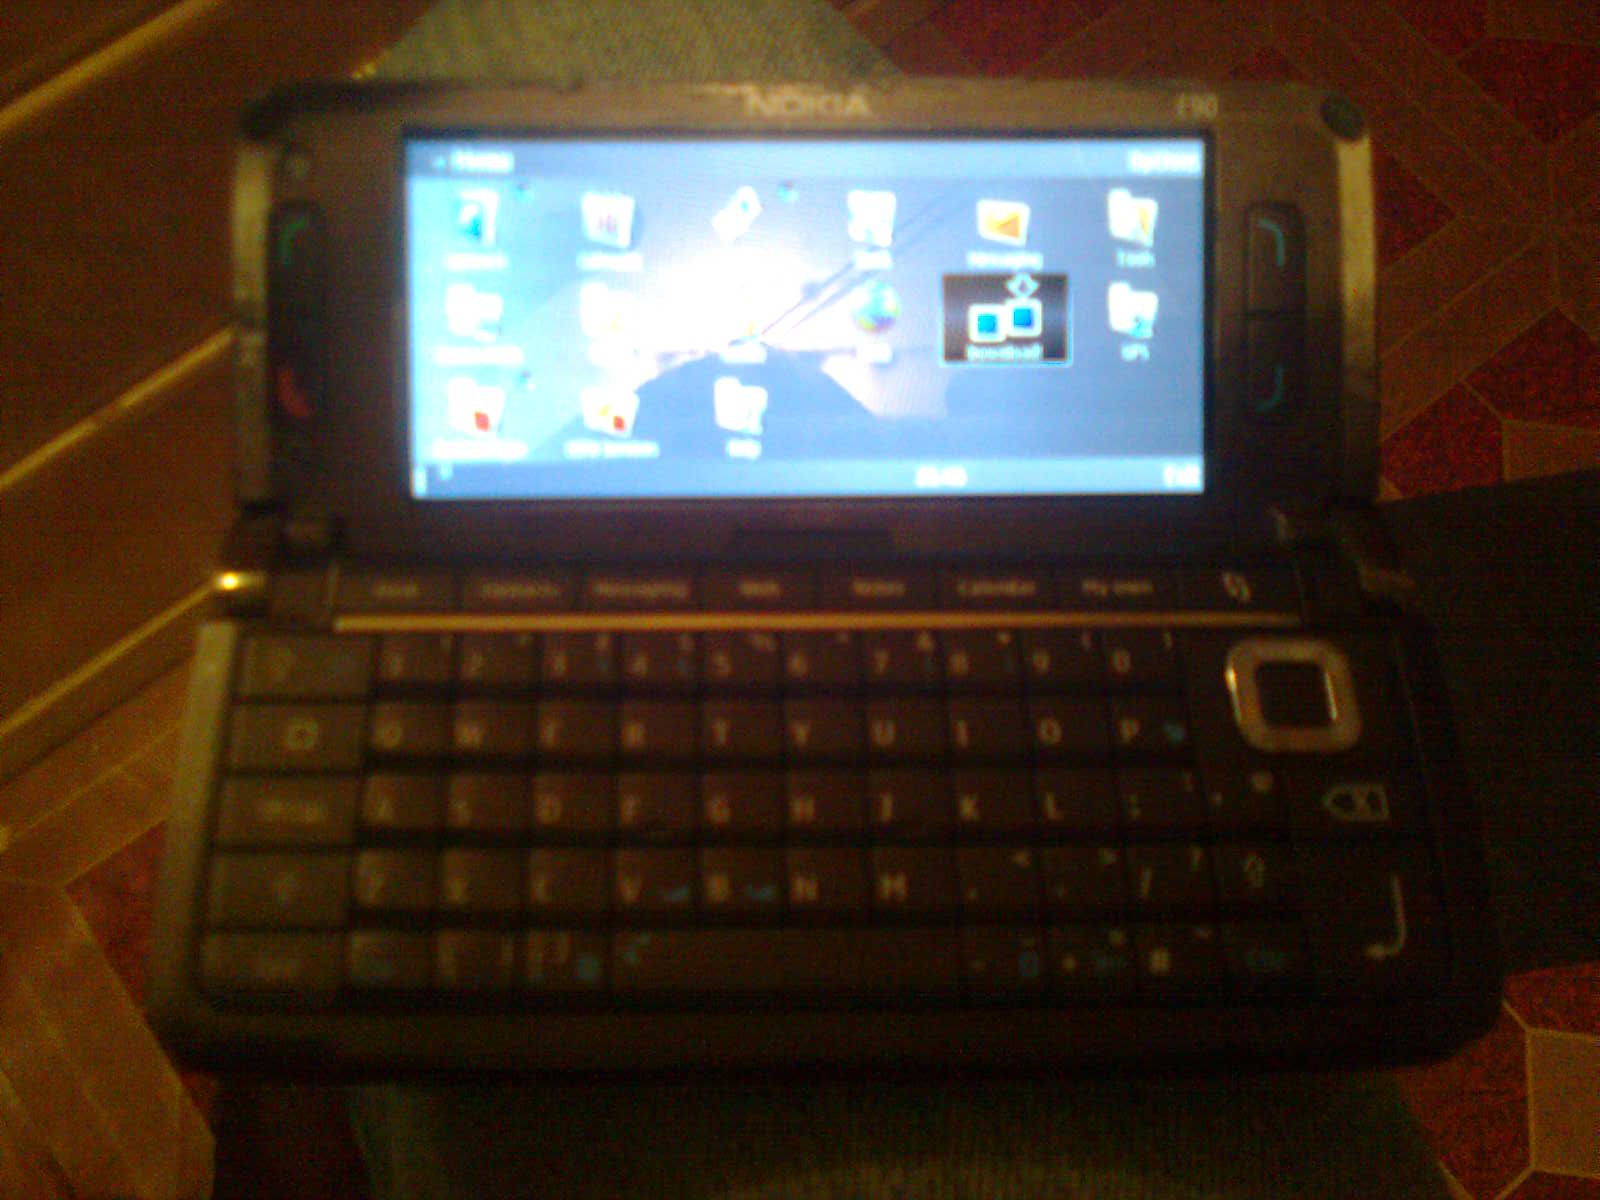 Nokia E90 for sale, working perfectly wit case n installation CD @35k ...